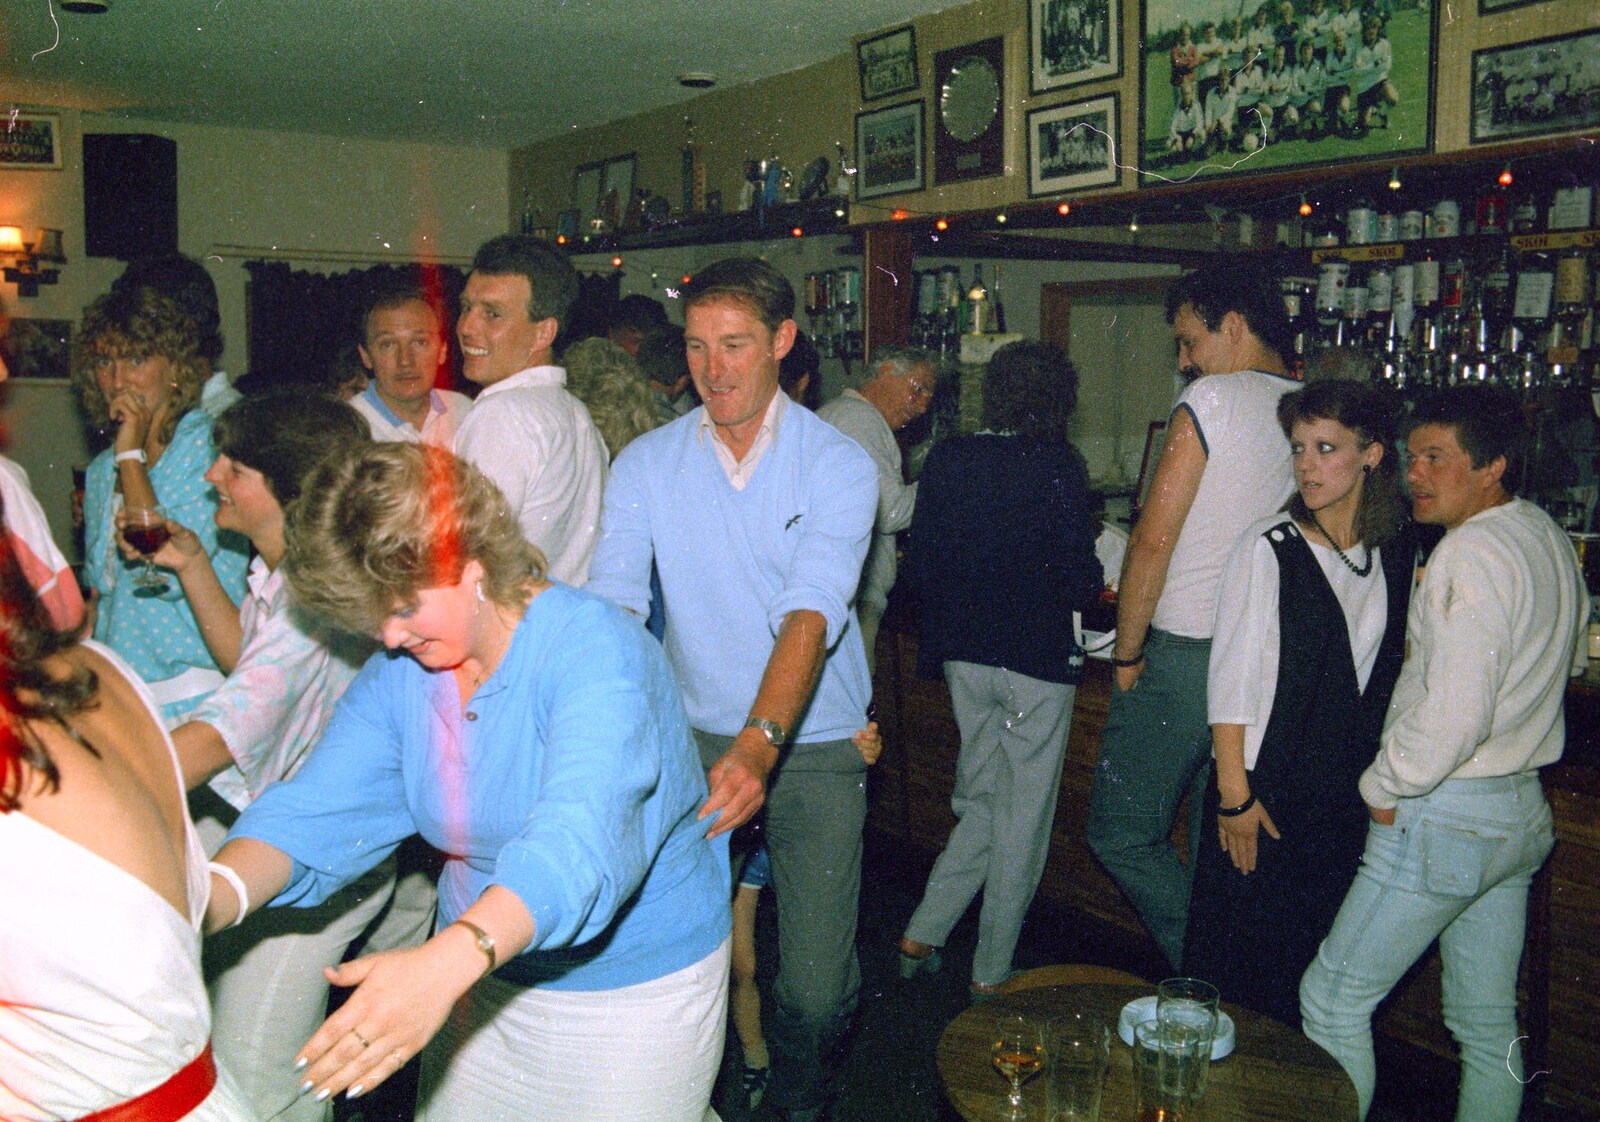 Carol and Brian in the conga from A CB Wedding and a Derelict Railway, Hampshire - 20th July 1986